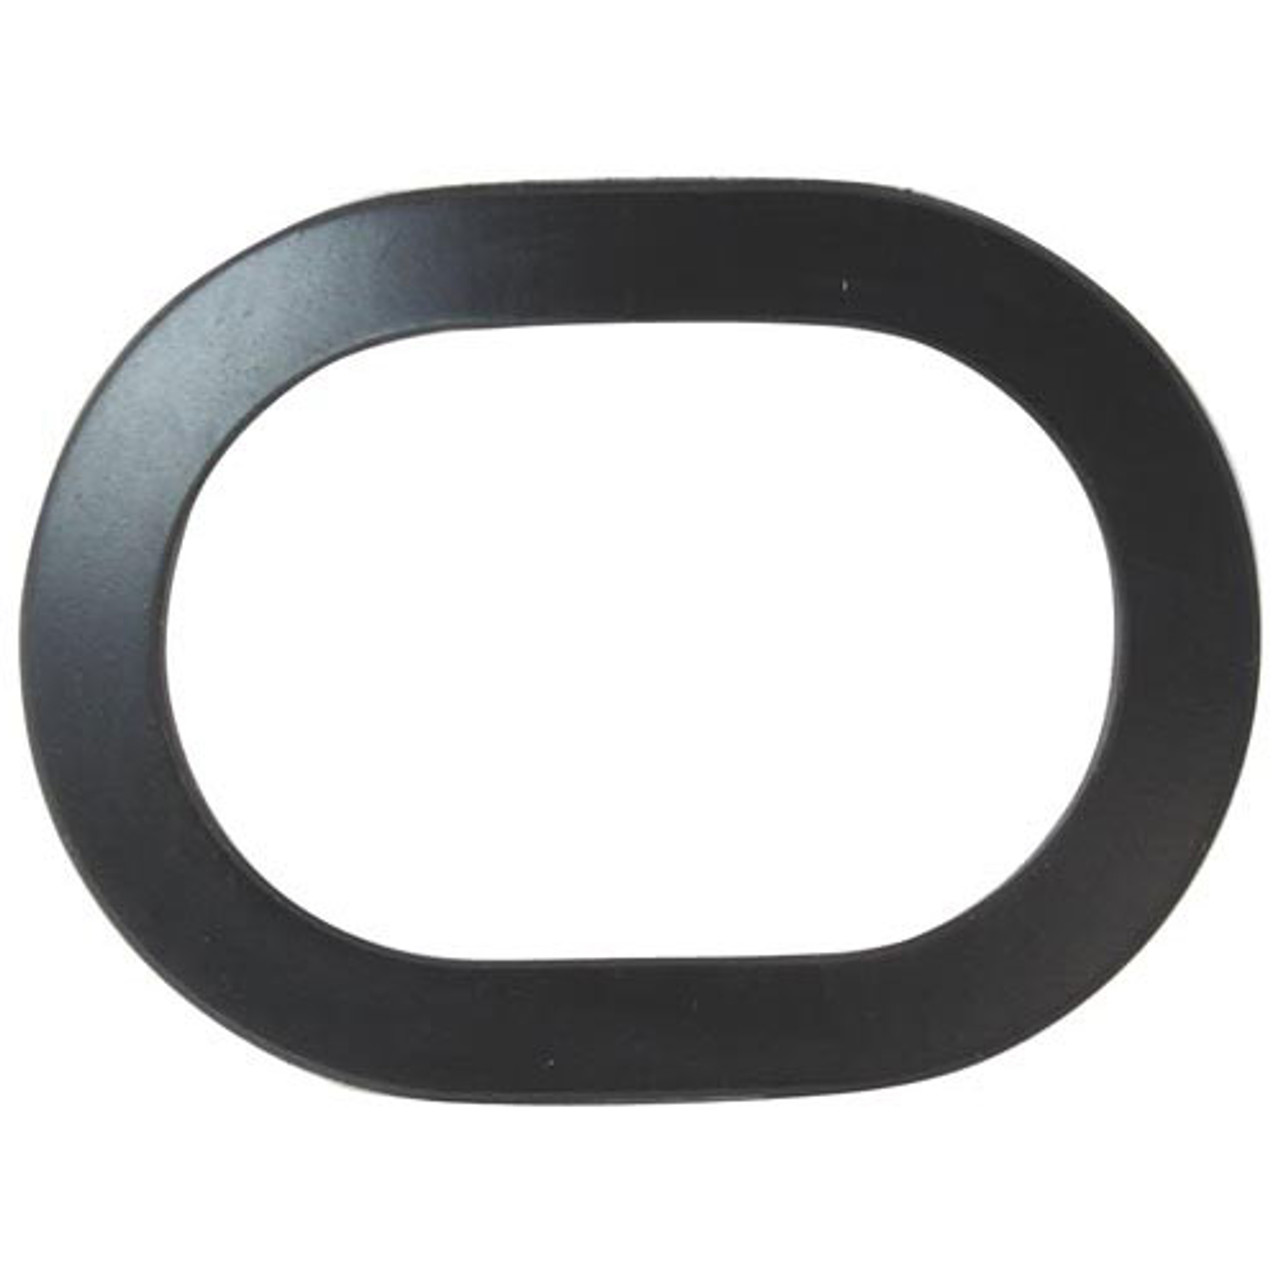 Hand Hole Gasket 5-3/8" X 7-3/8" - Replacement Part For Cleveland 7106